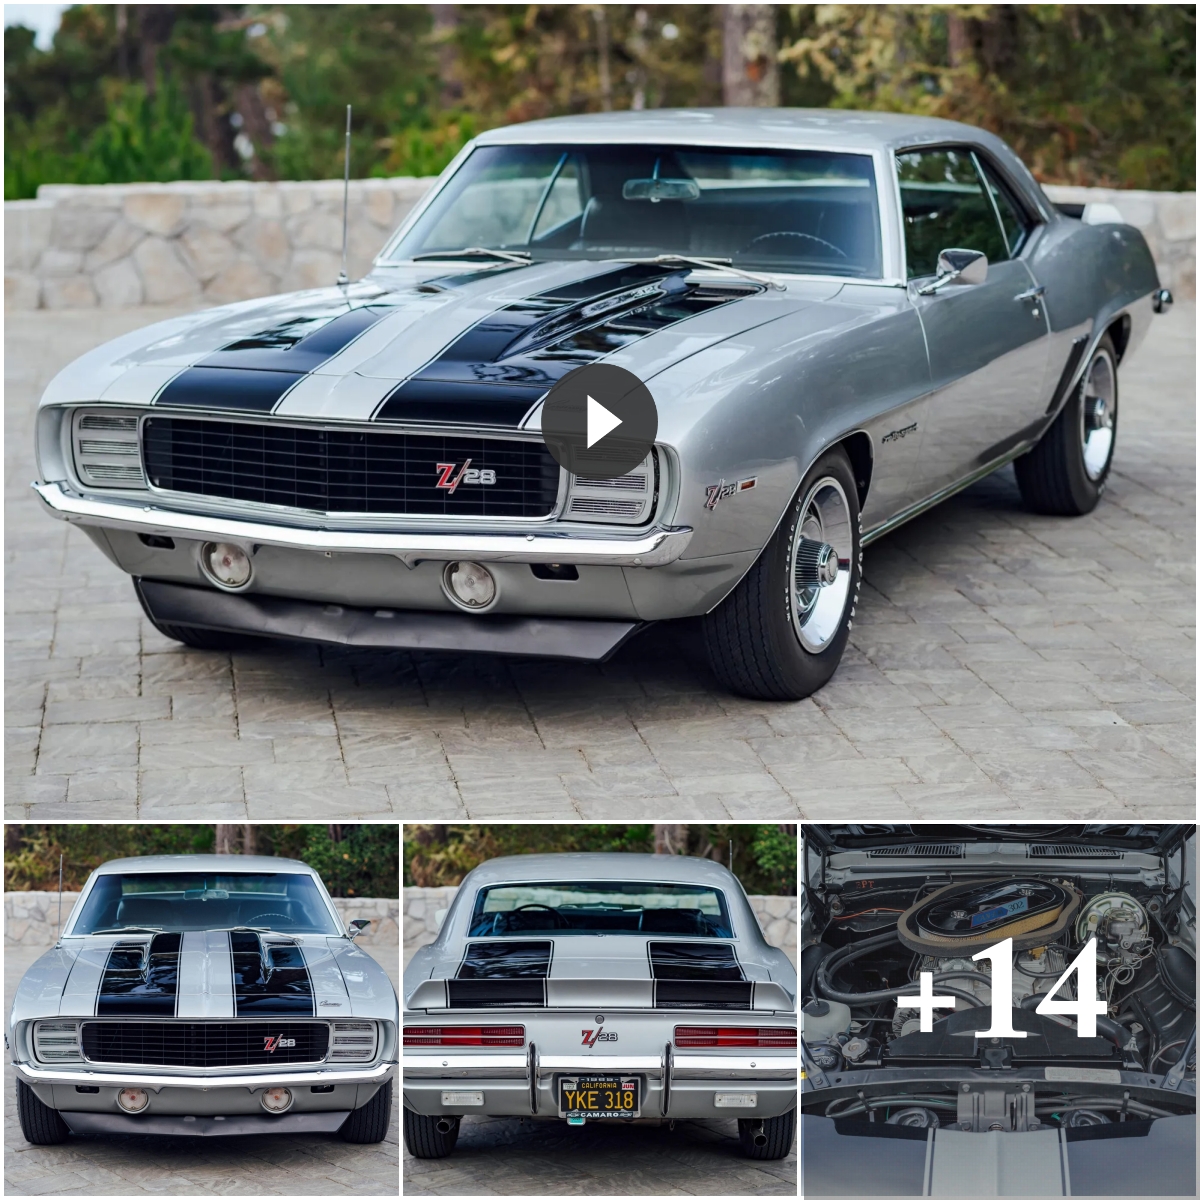 Unleashing the Beast: 1969 Chevrolet Camaro Z28 RS – A Timeless American Classic